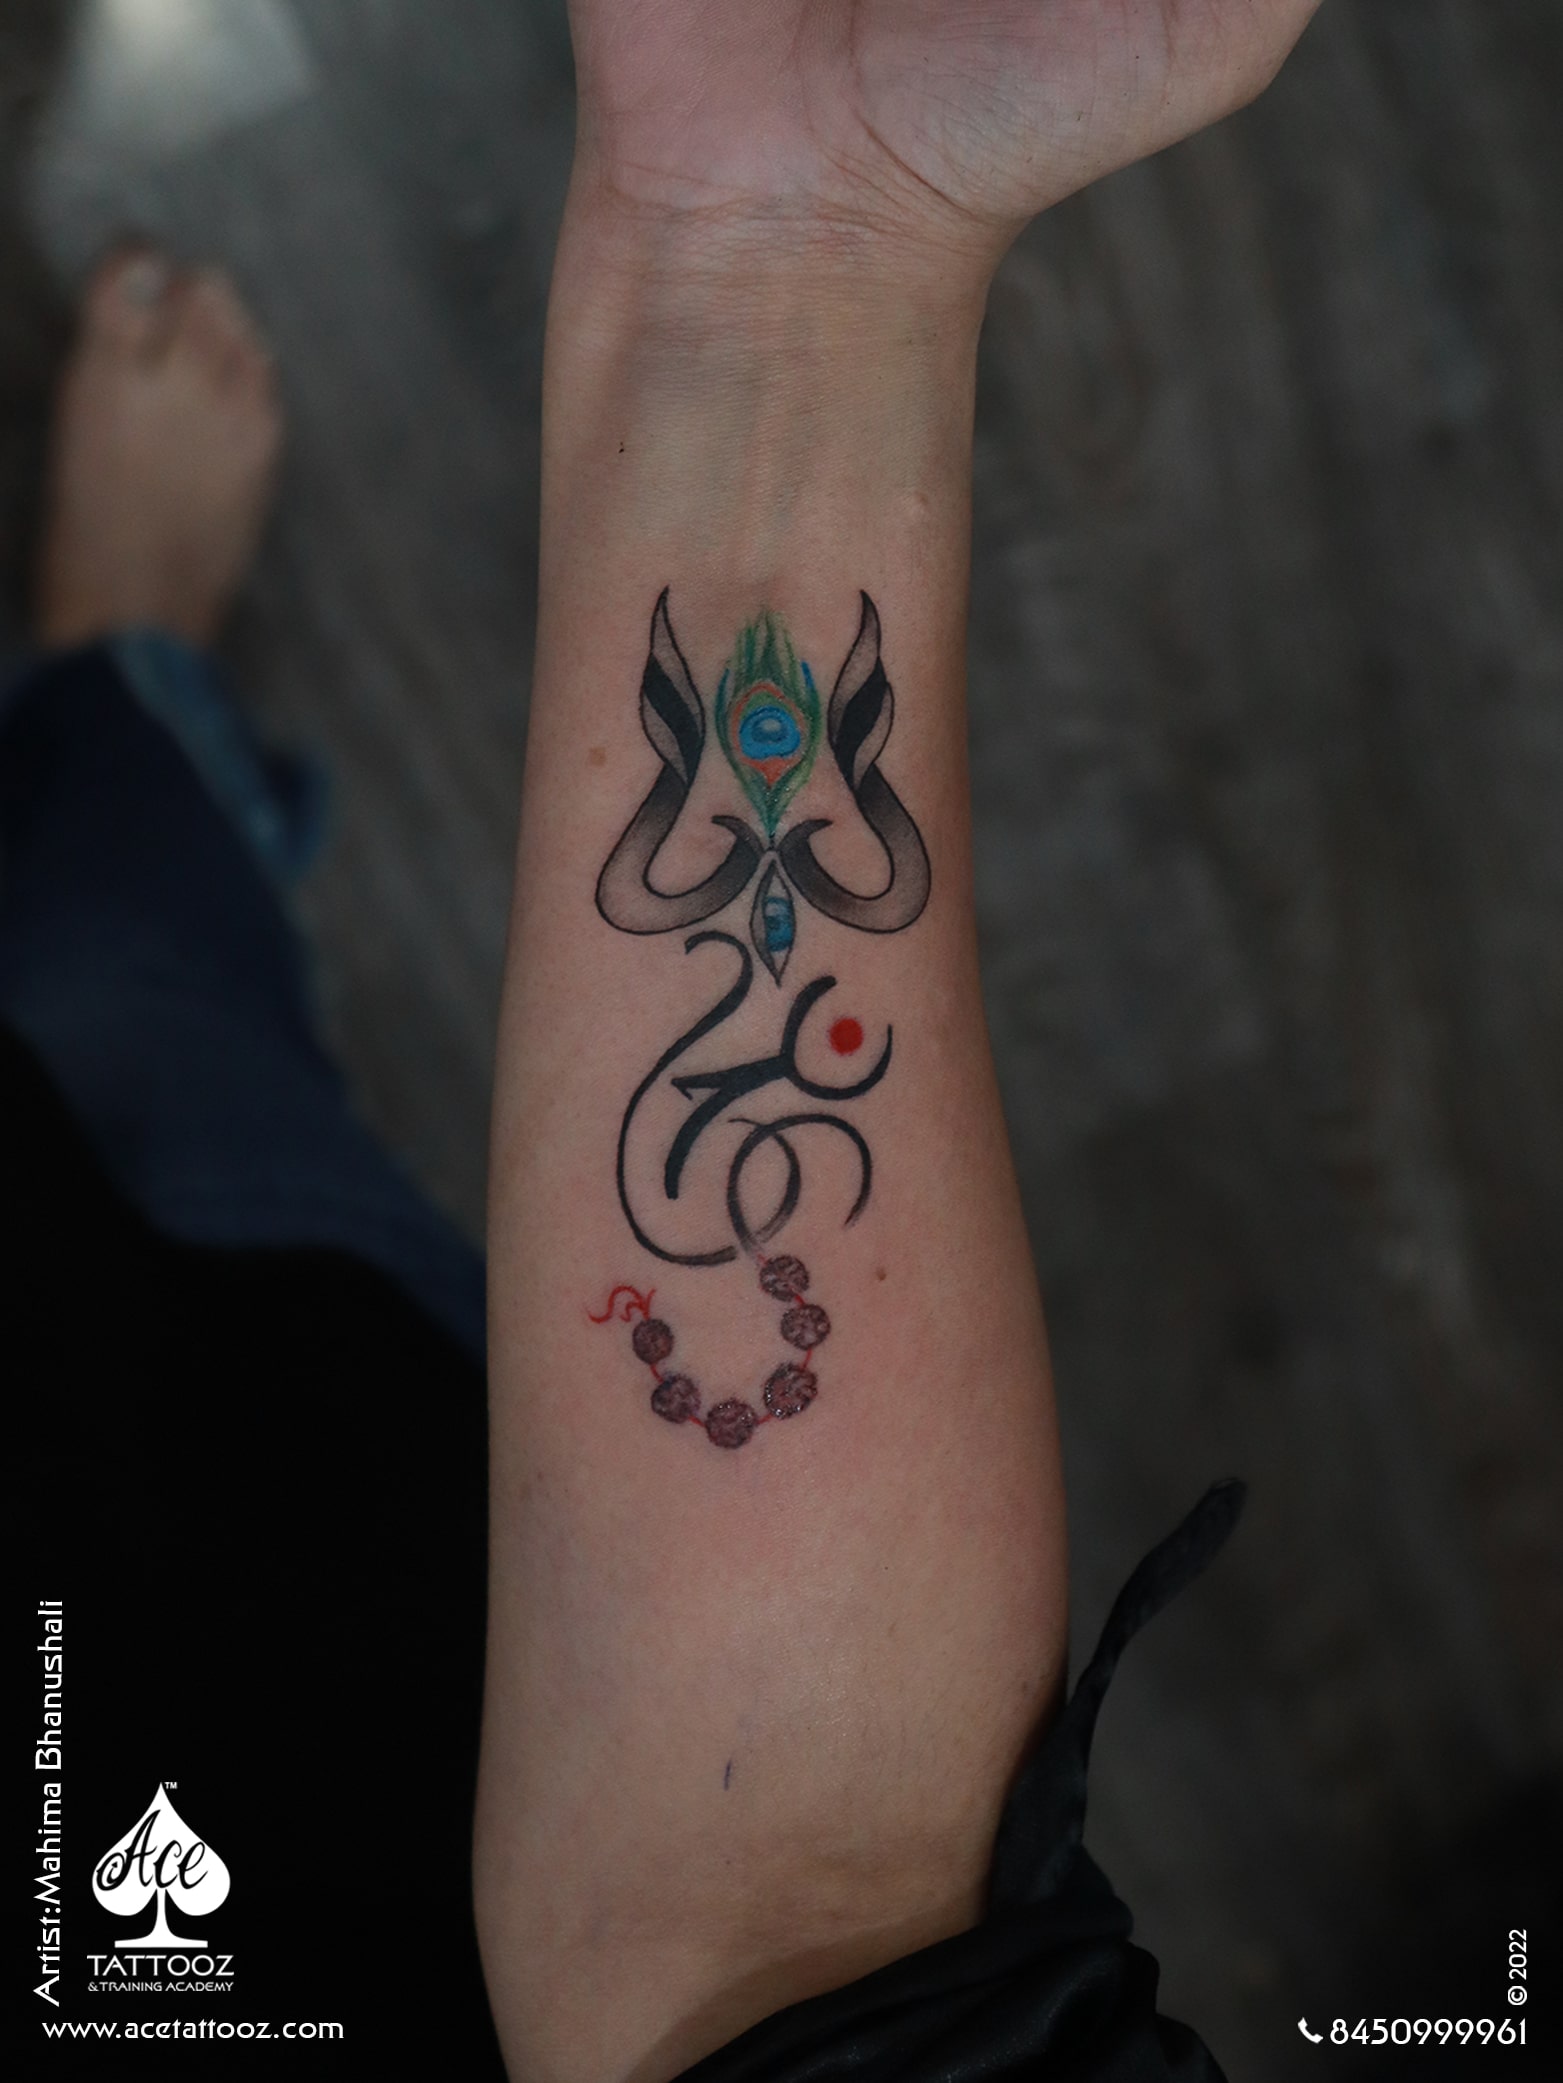 47 Vibrant Peacock Tattoo Designs  Their Meaning  Tattoo Glee